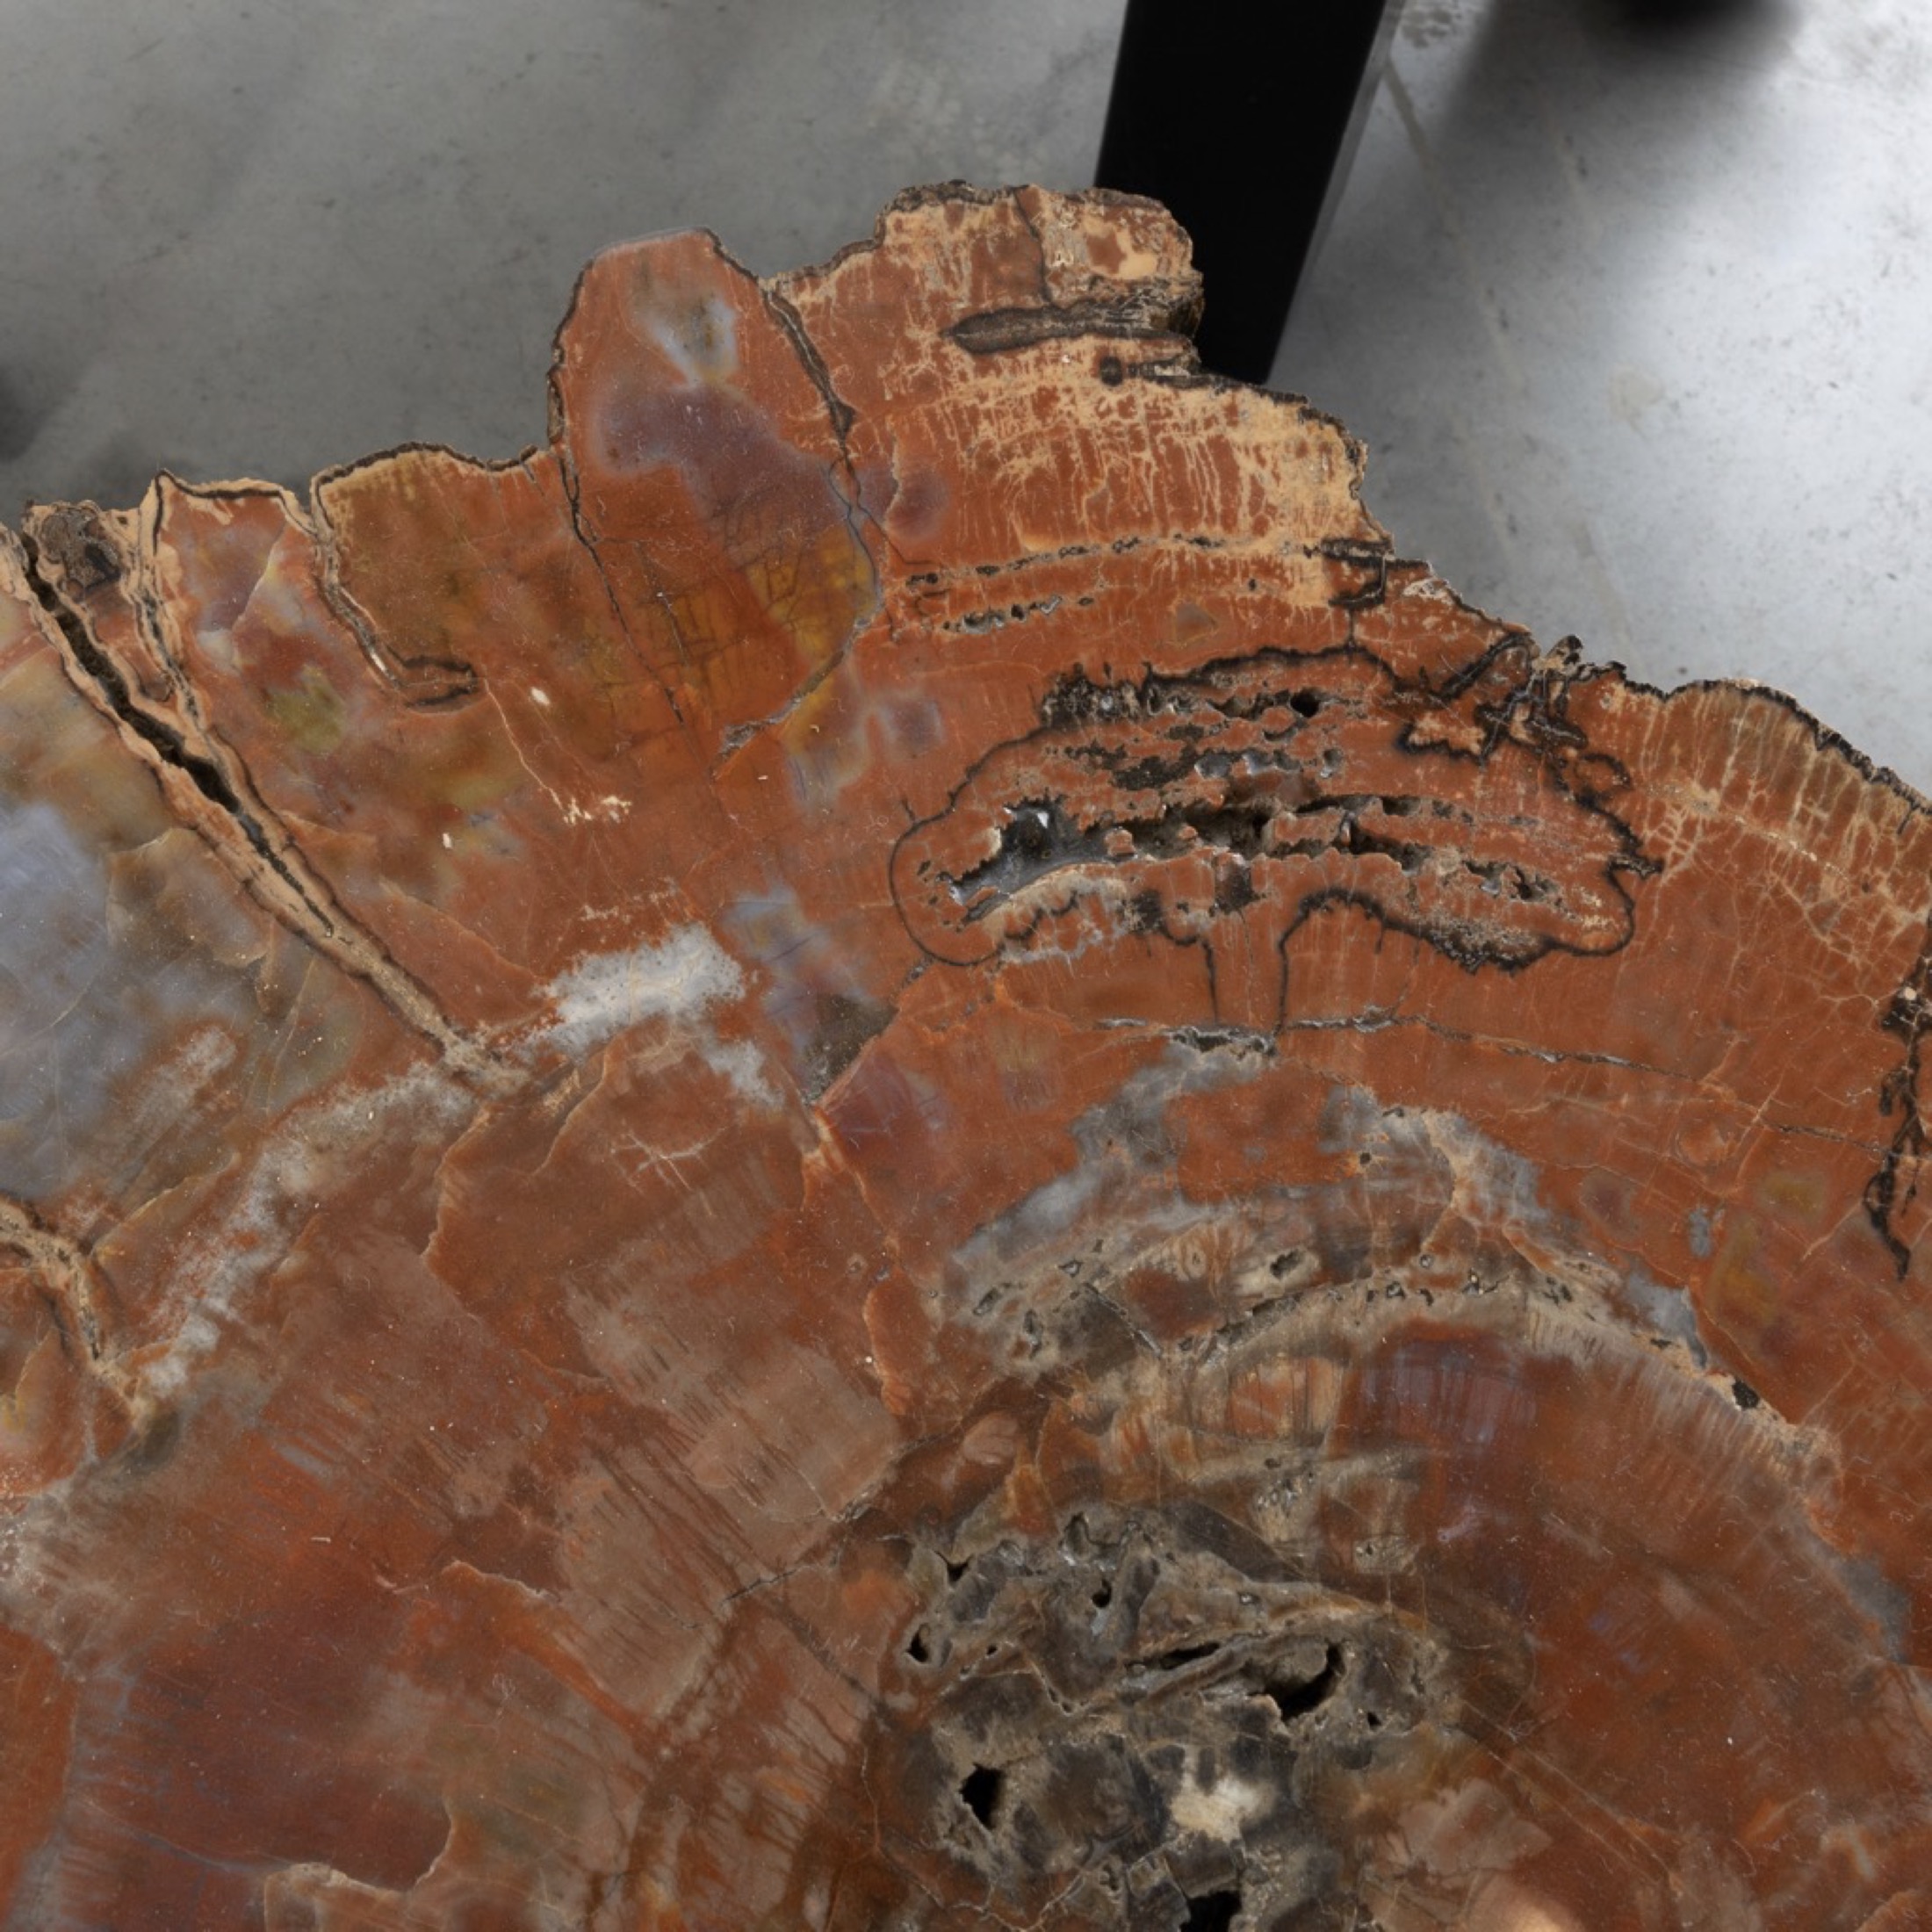 Set of three fossilized Arizona Sequoia coffee tables by Ado Chale